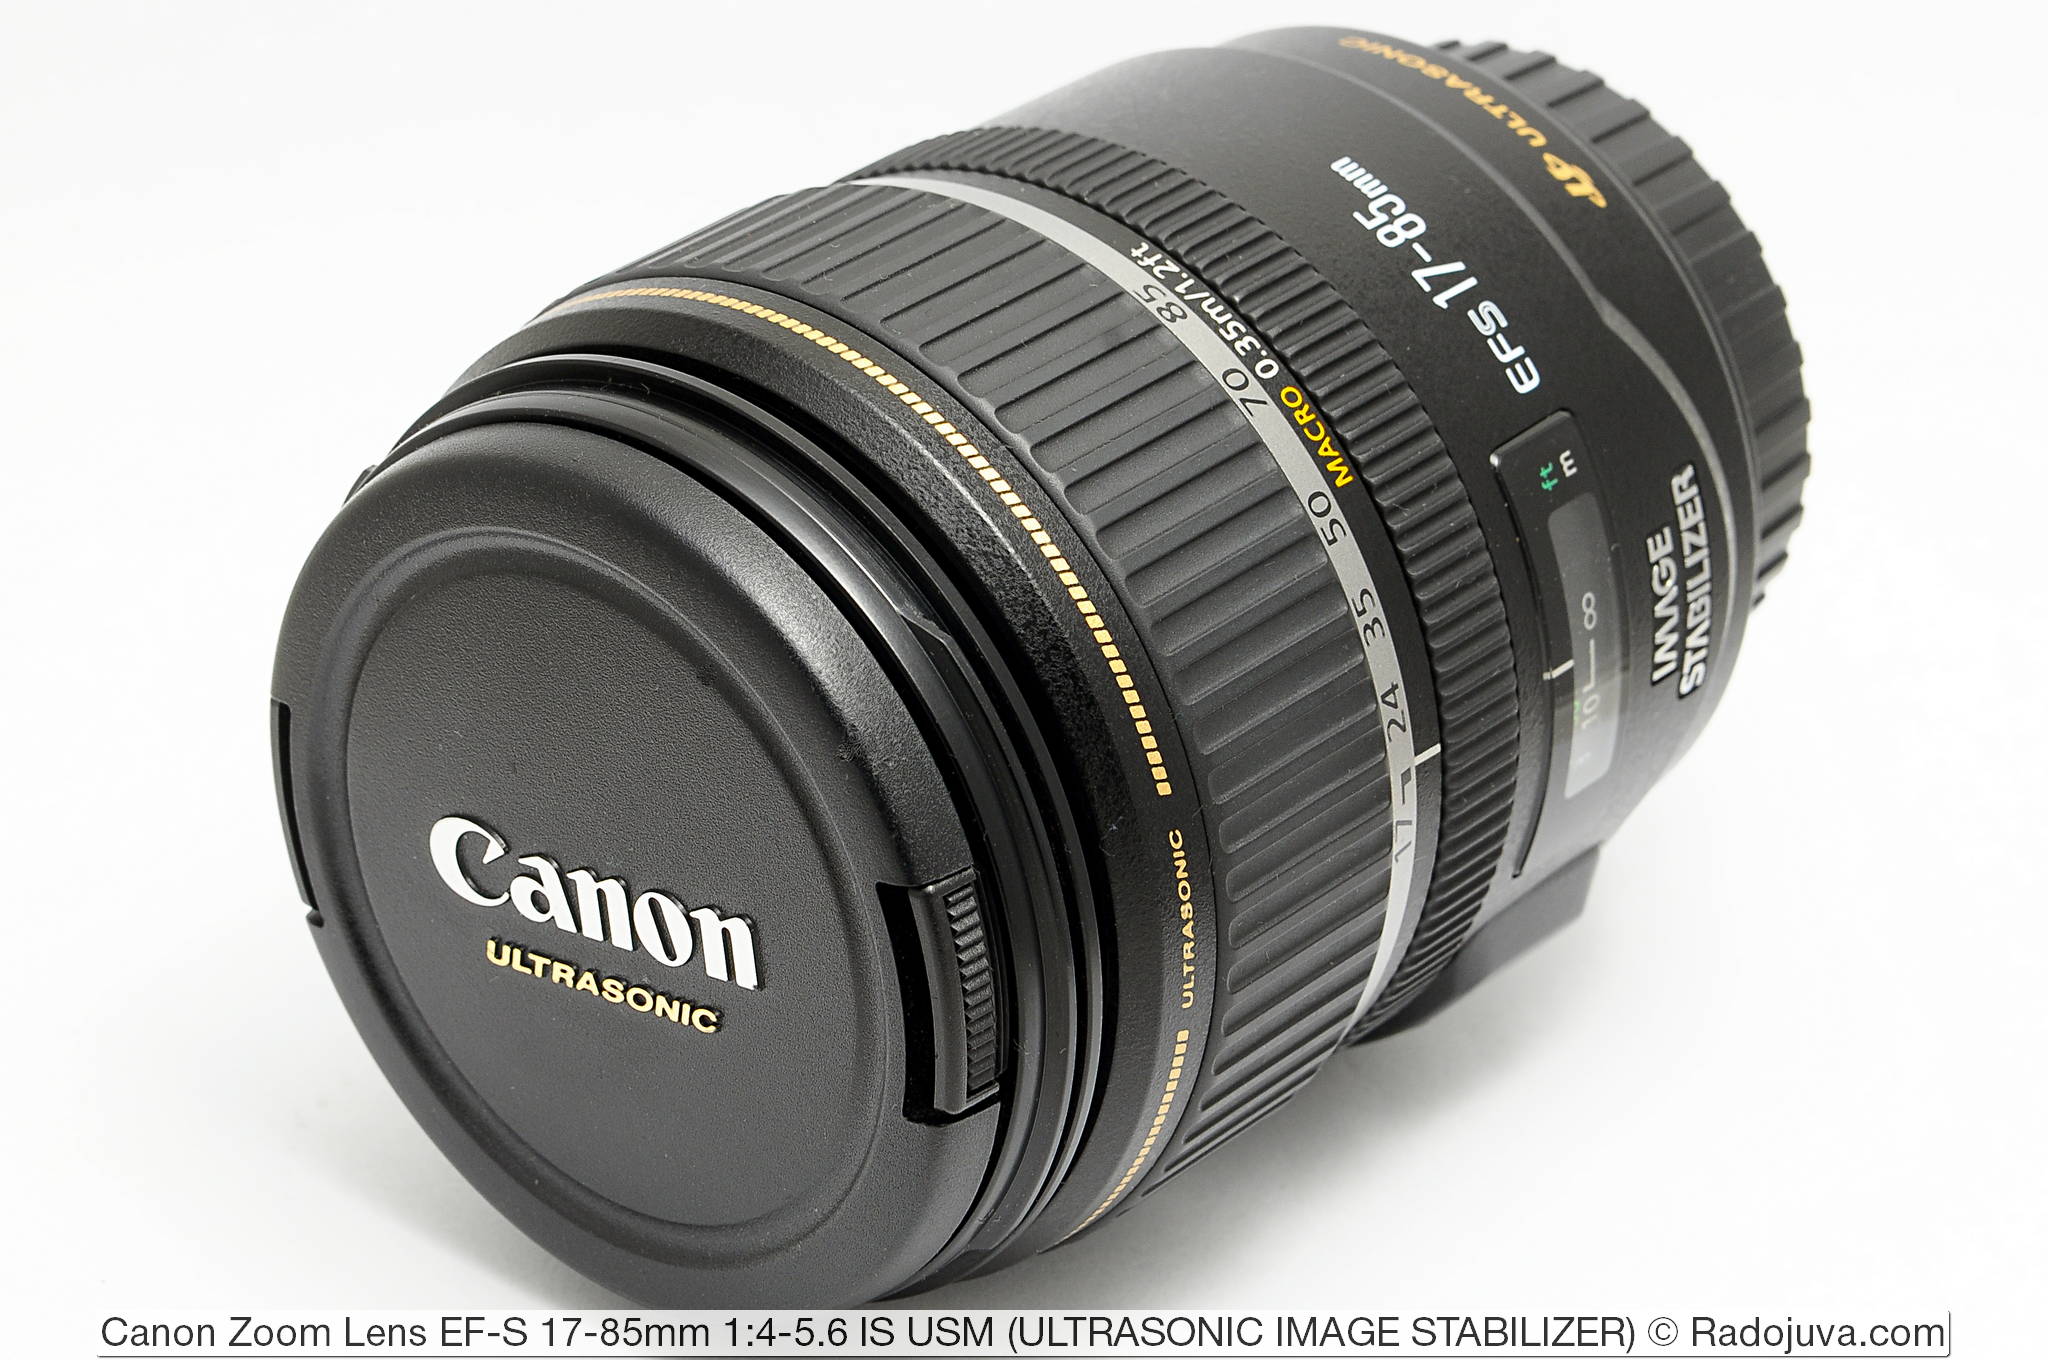 Review of Canon Zoom Lens EF-S 17-85mm 1: 4-5.6 IS USM | Happy